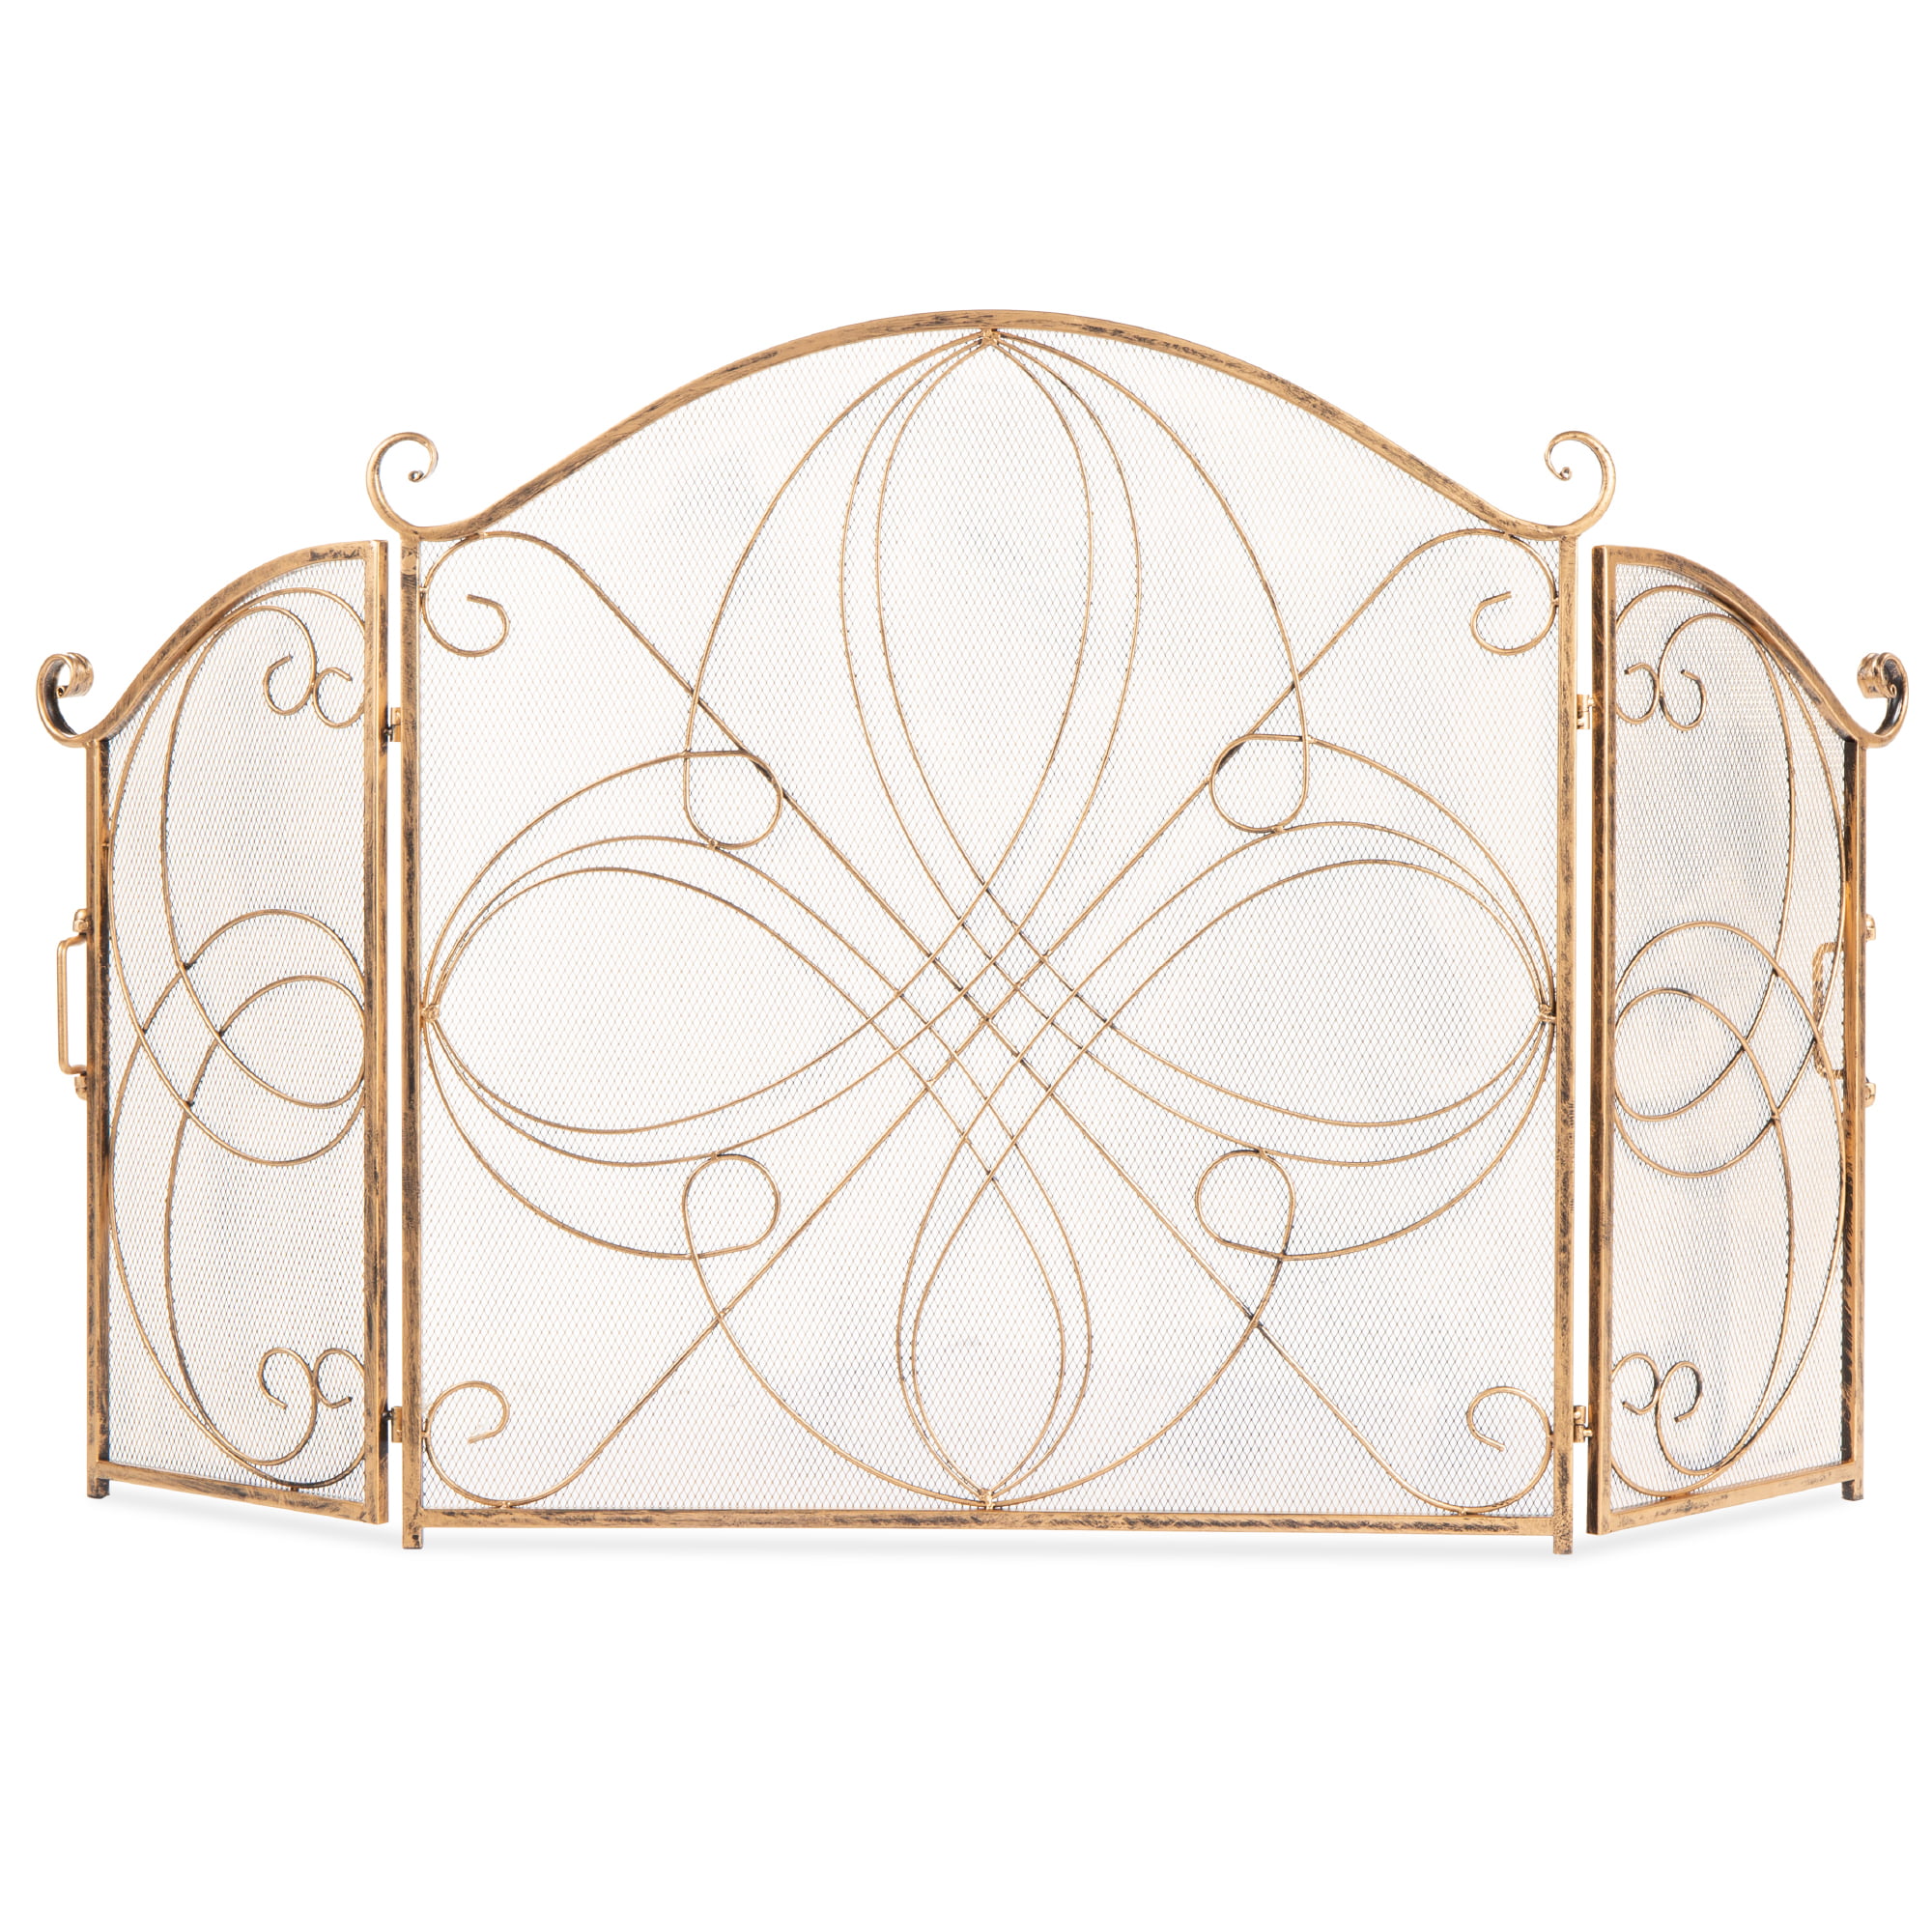 Fire Screen Brass Folding Panel Guard Sparkguard Cover New By Home Discount 